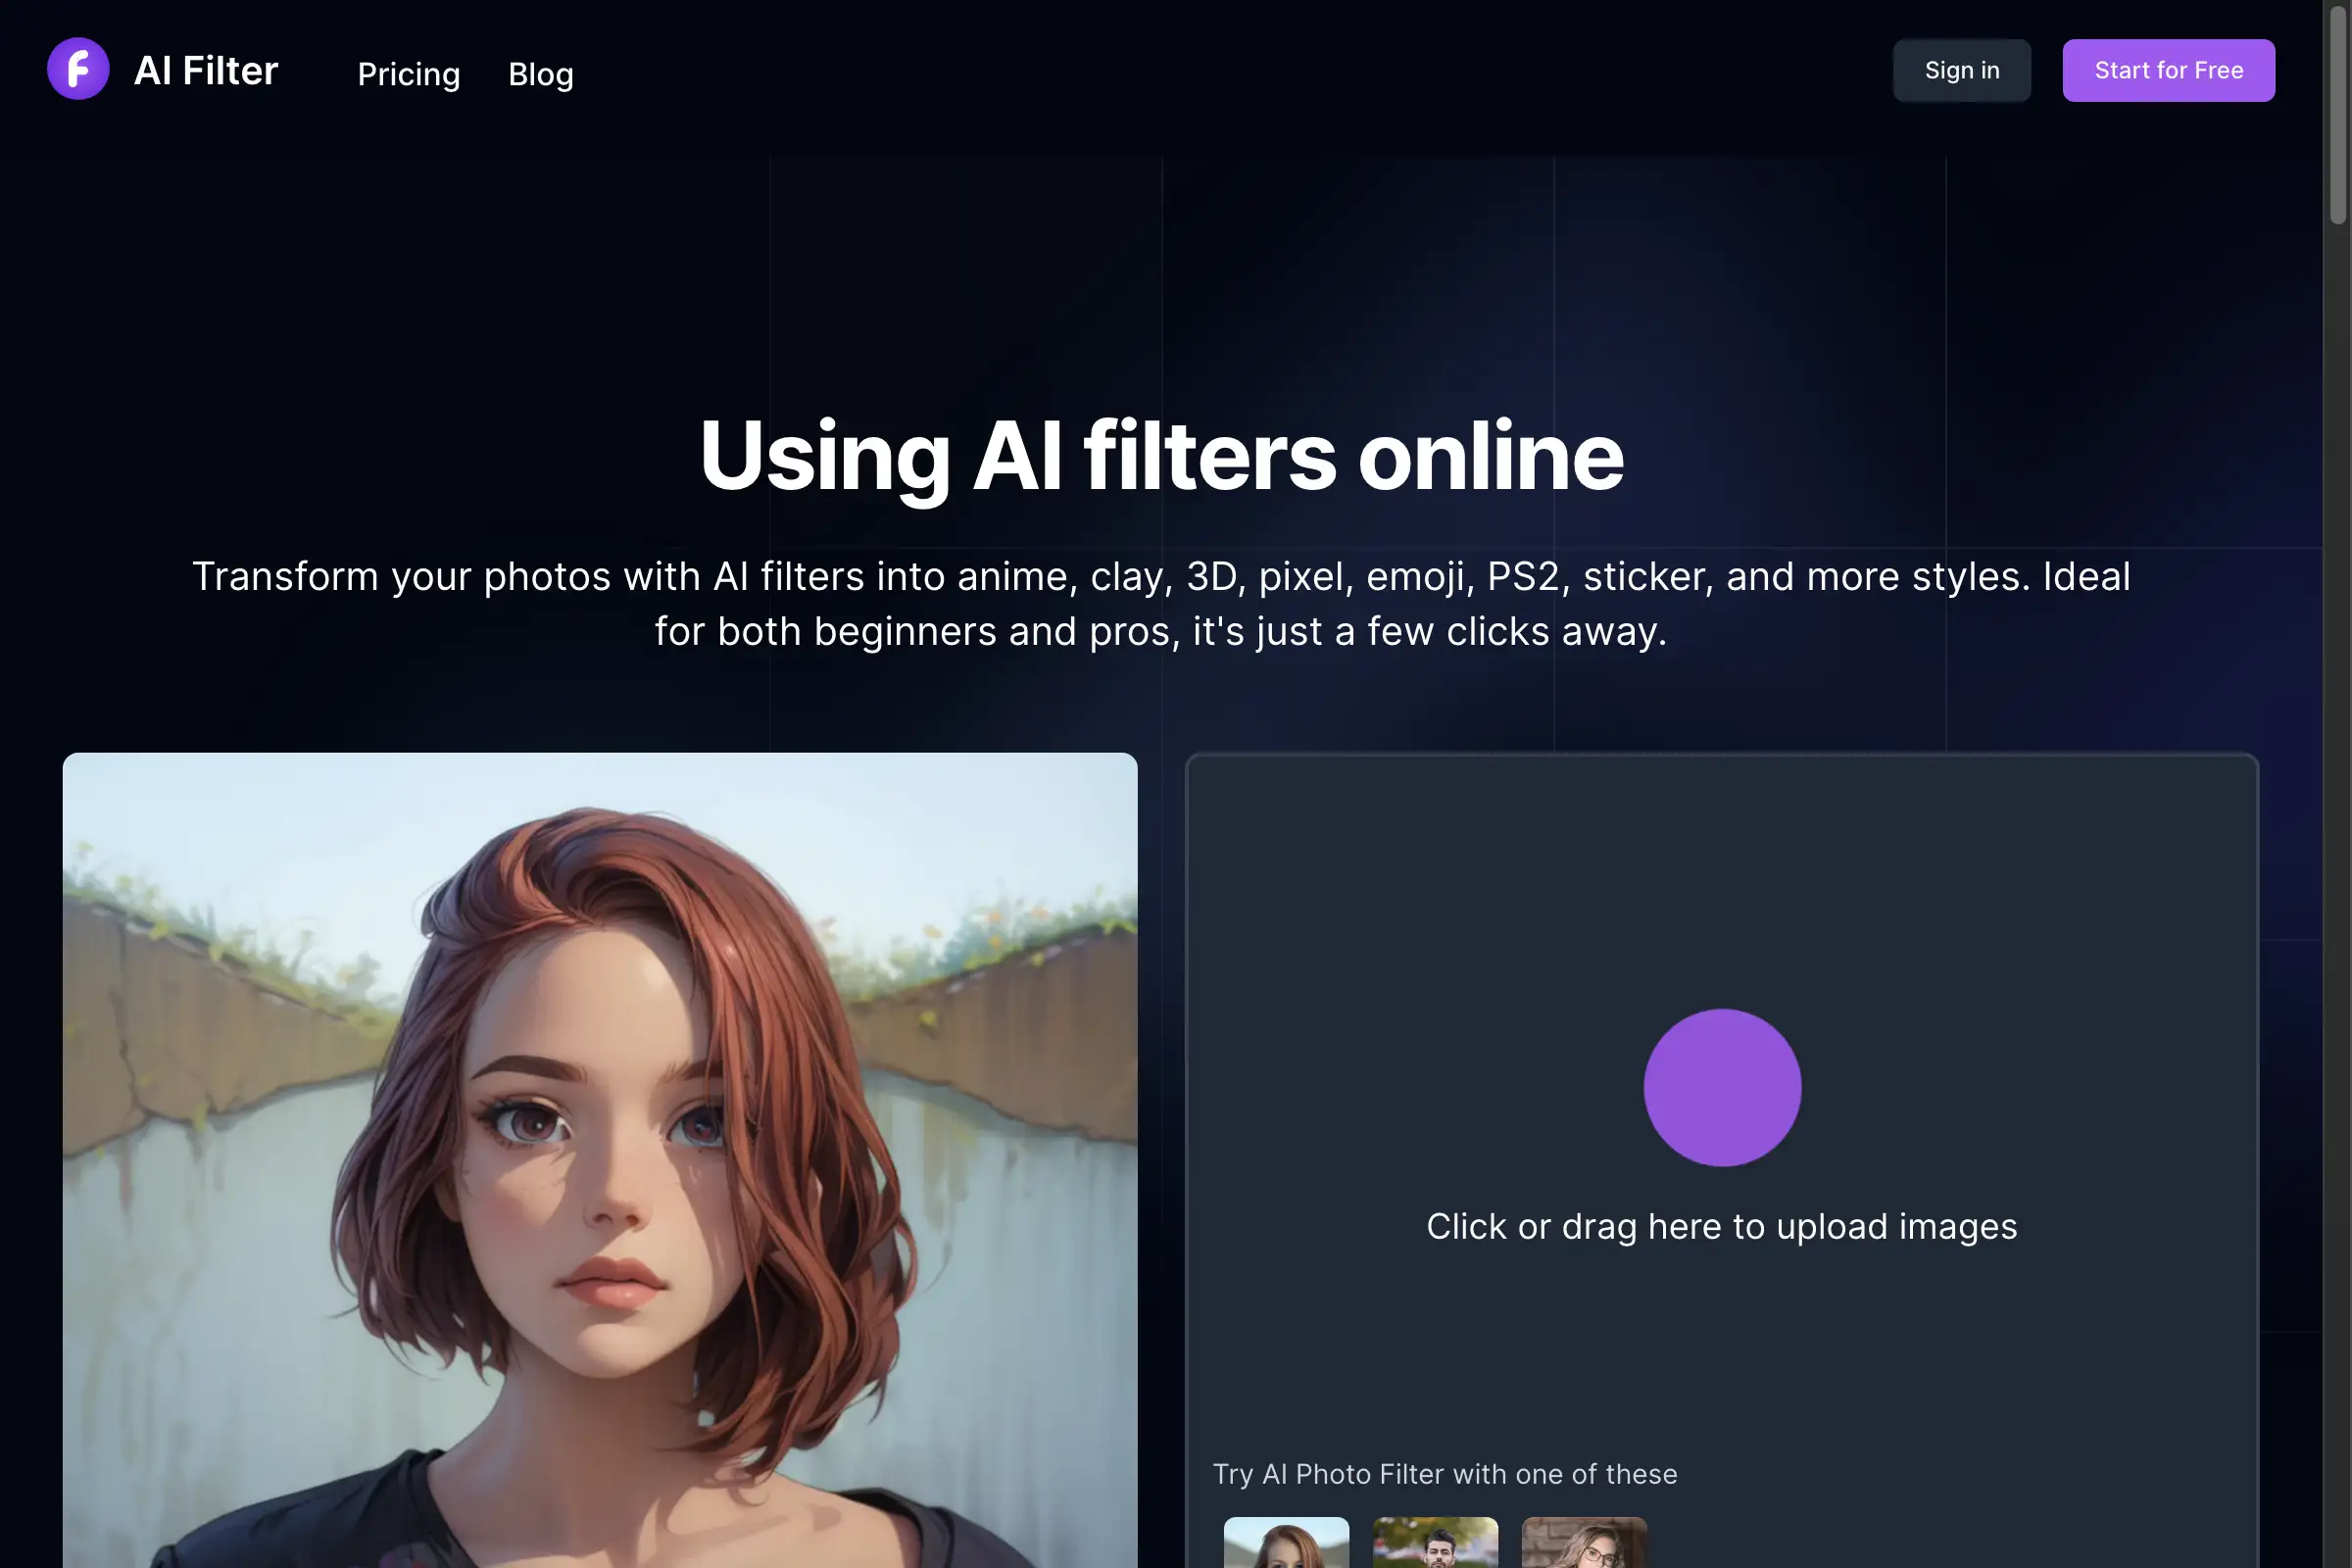 AI Filter - Transform your photos with filters